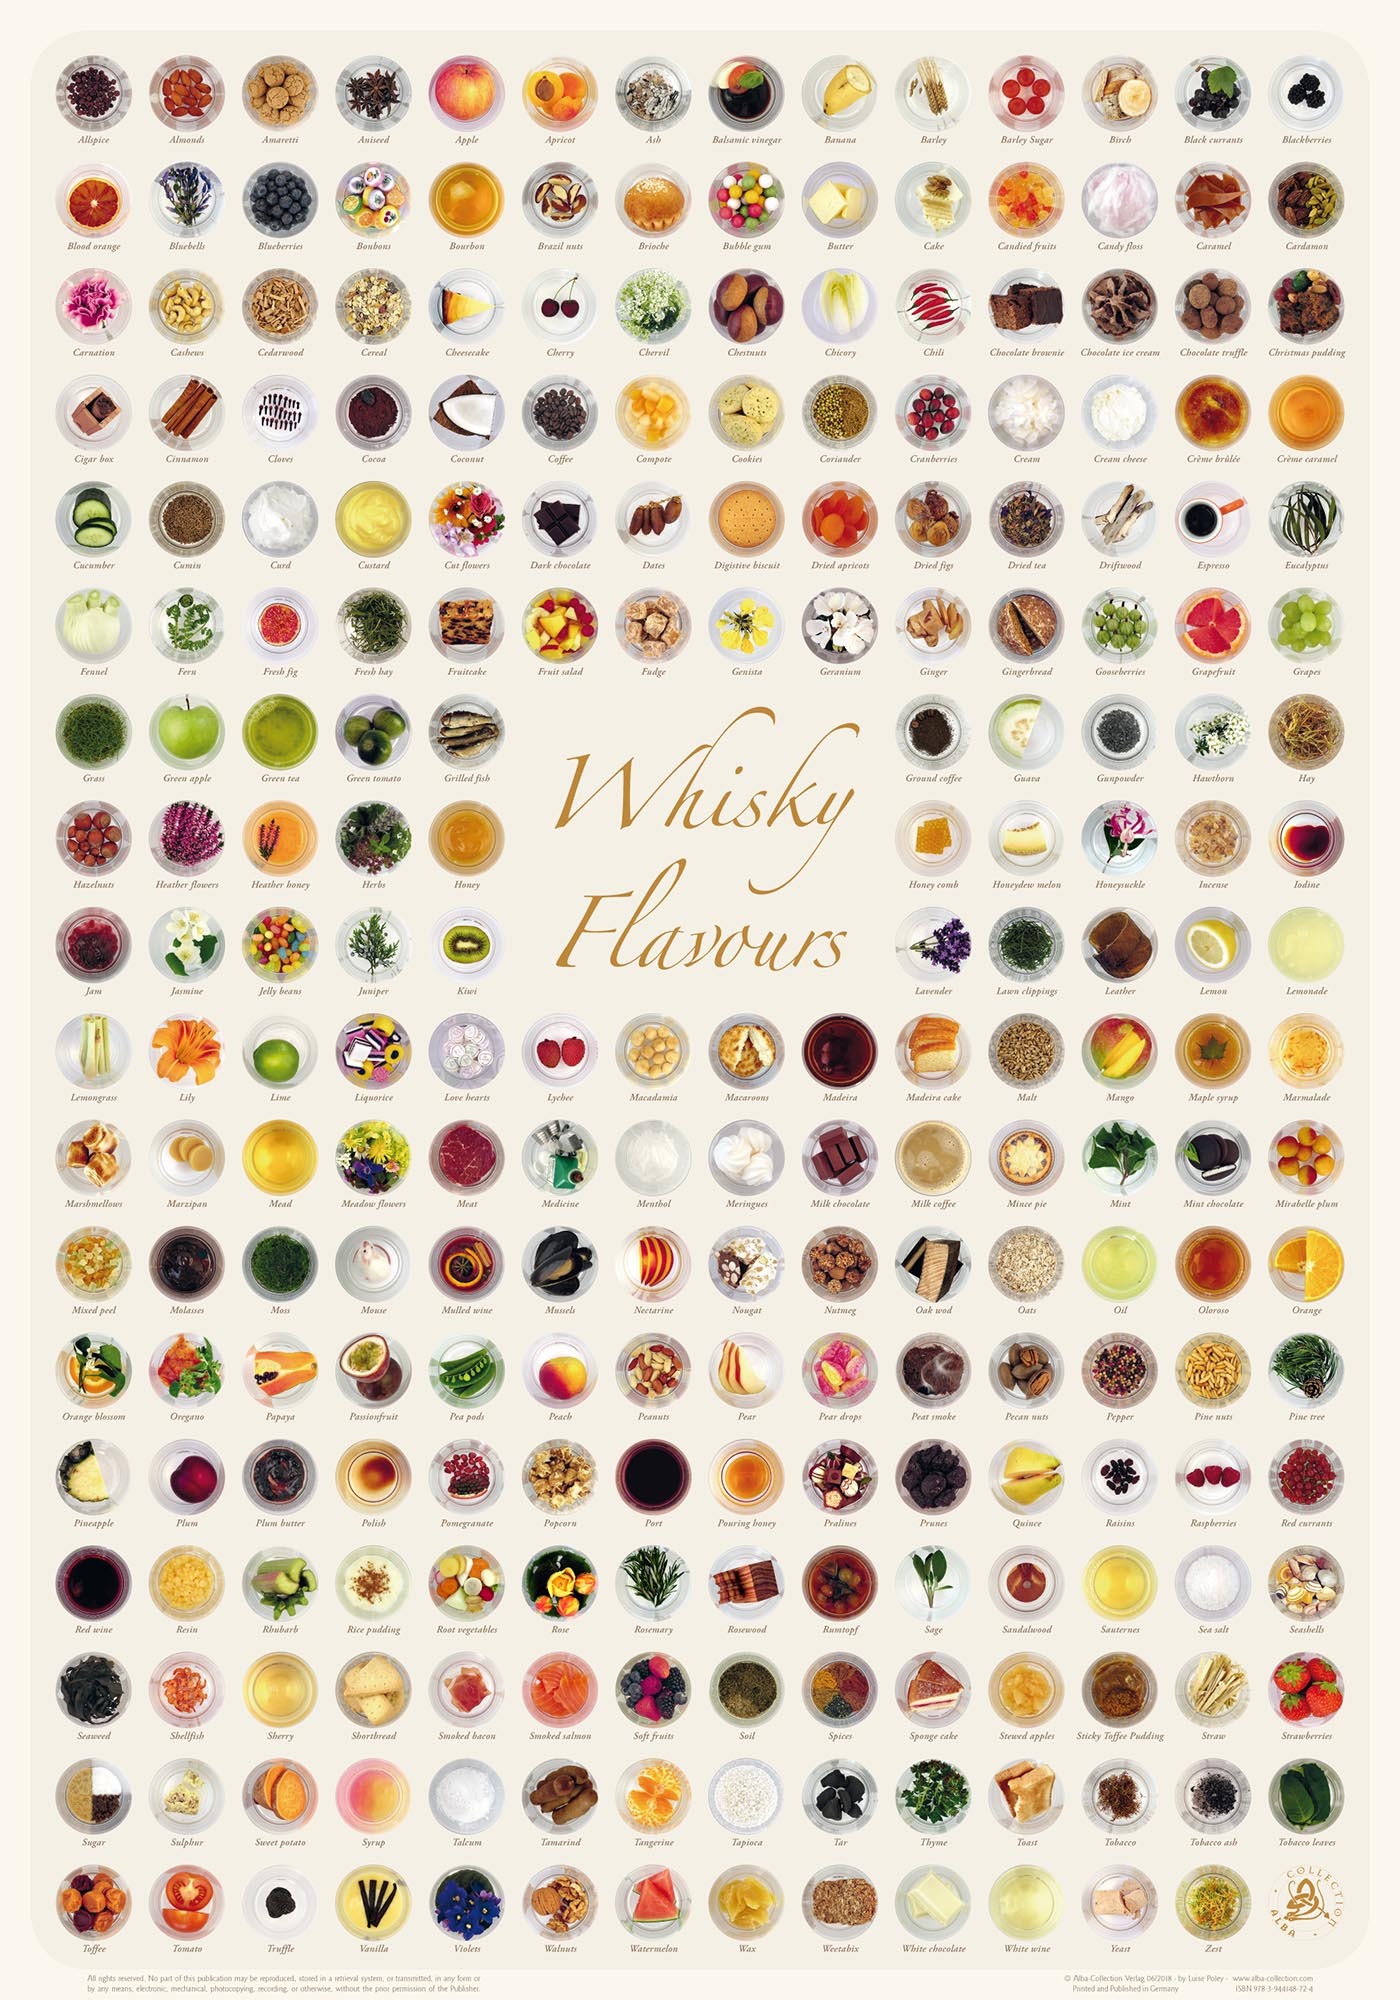 Whisky Flavours Collection